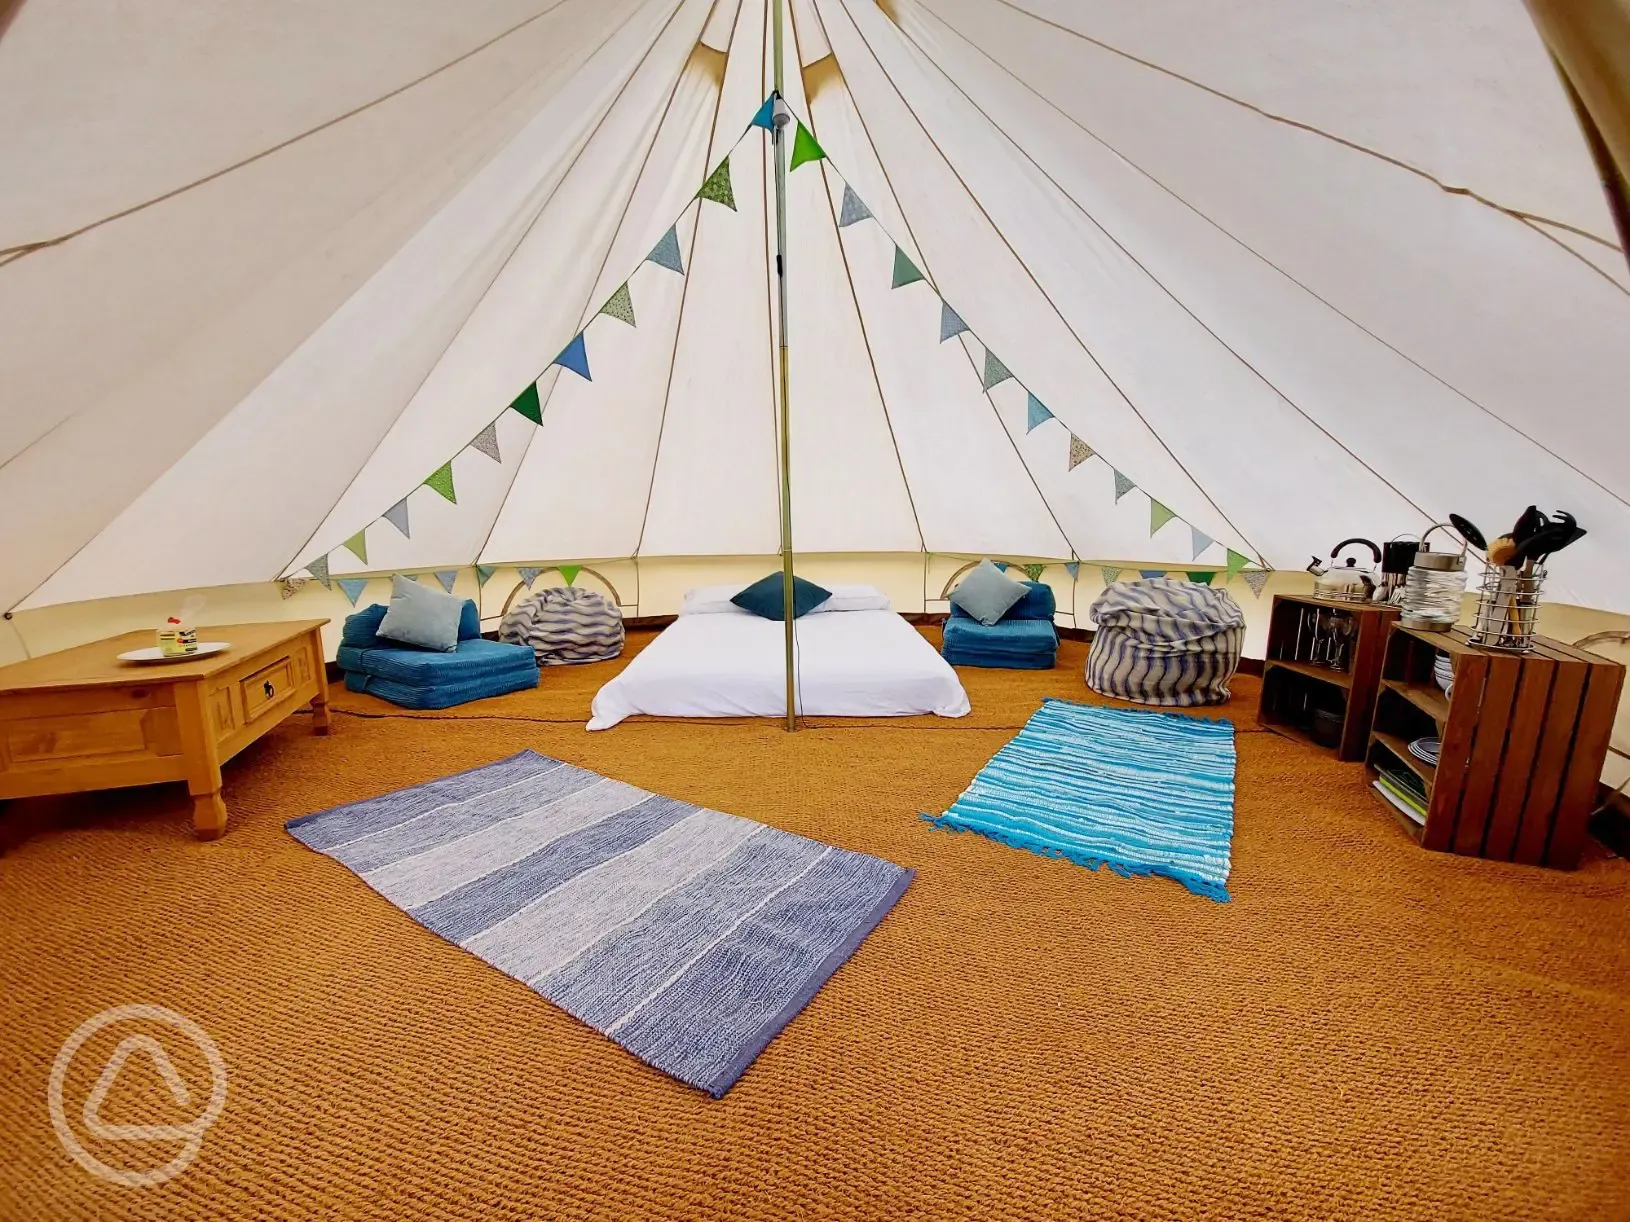 Large bell tent interior 